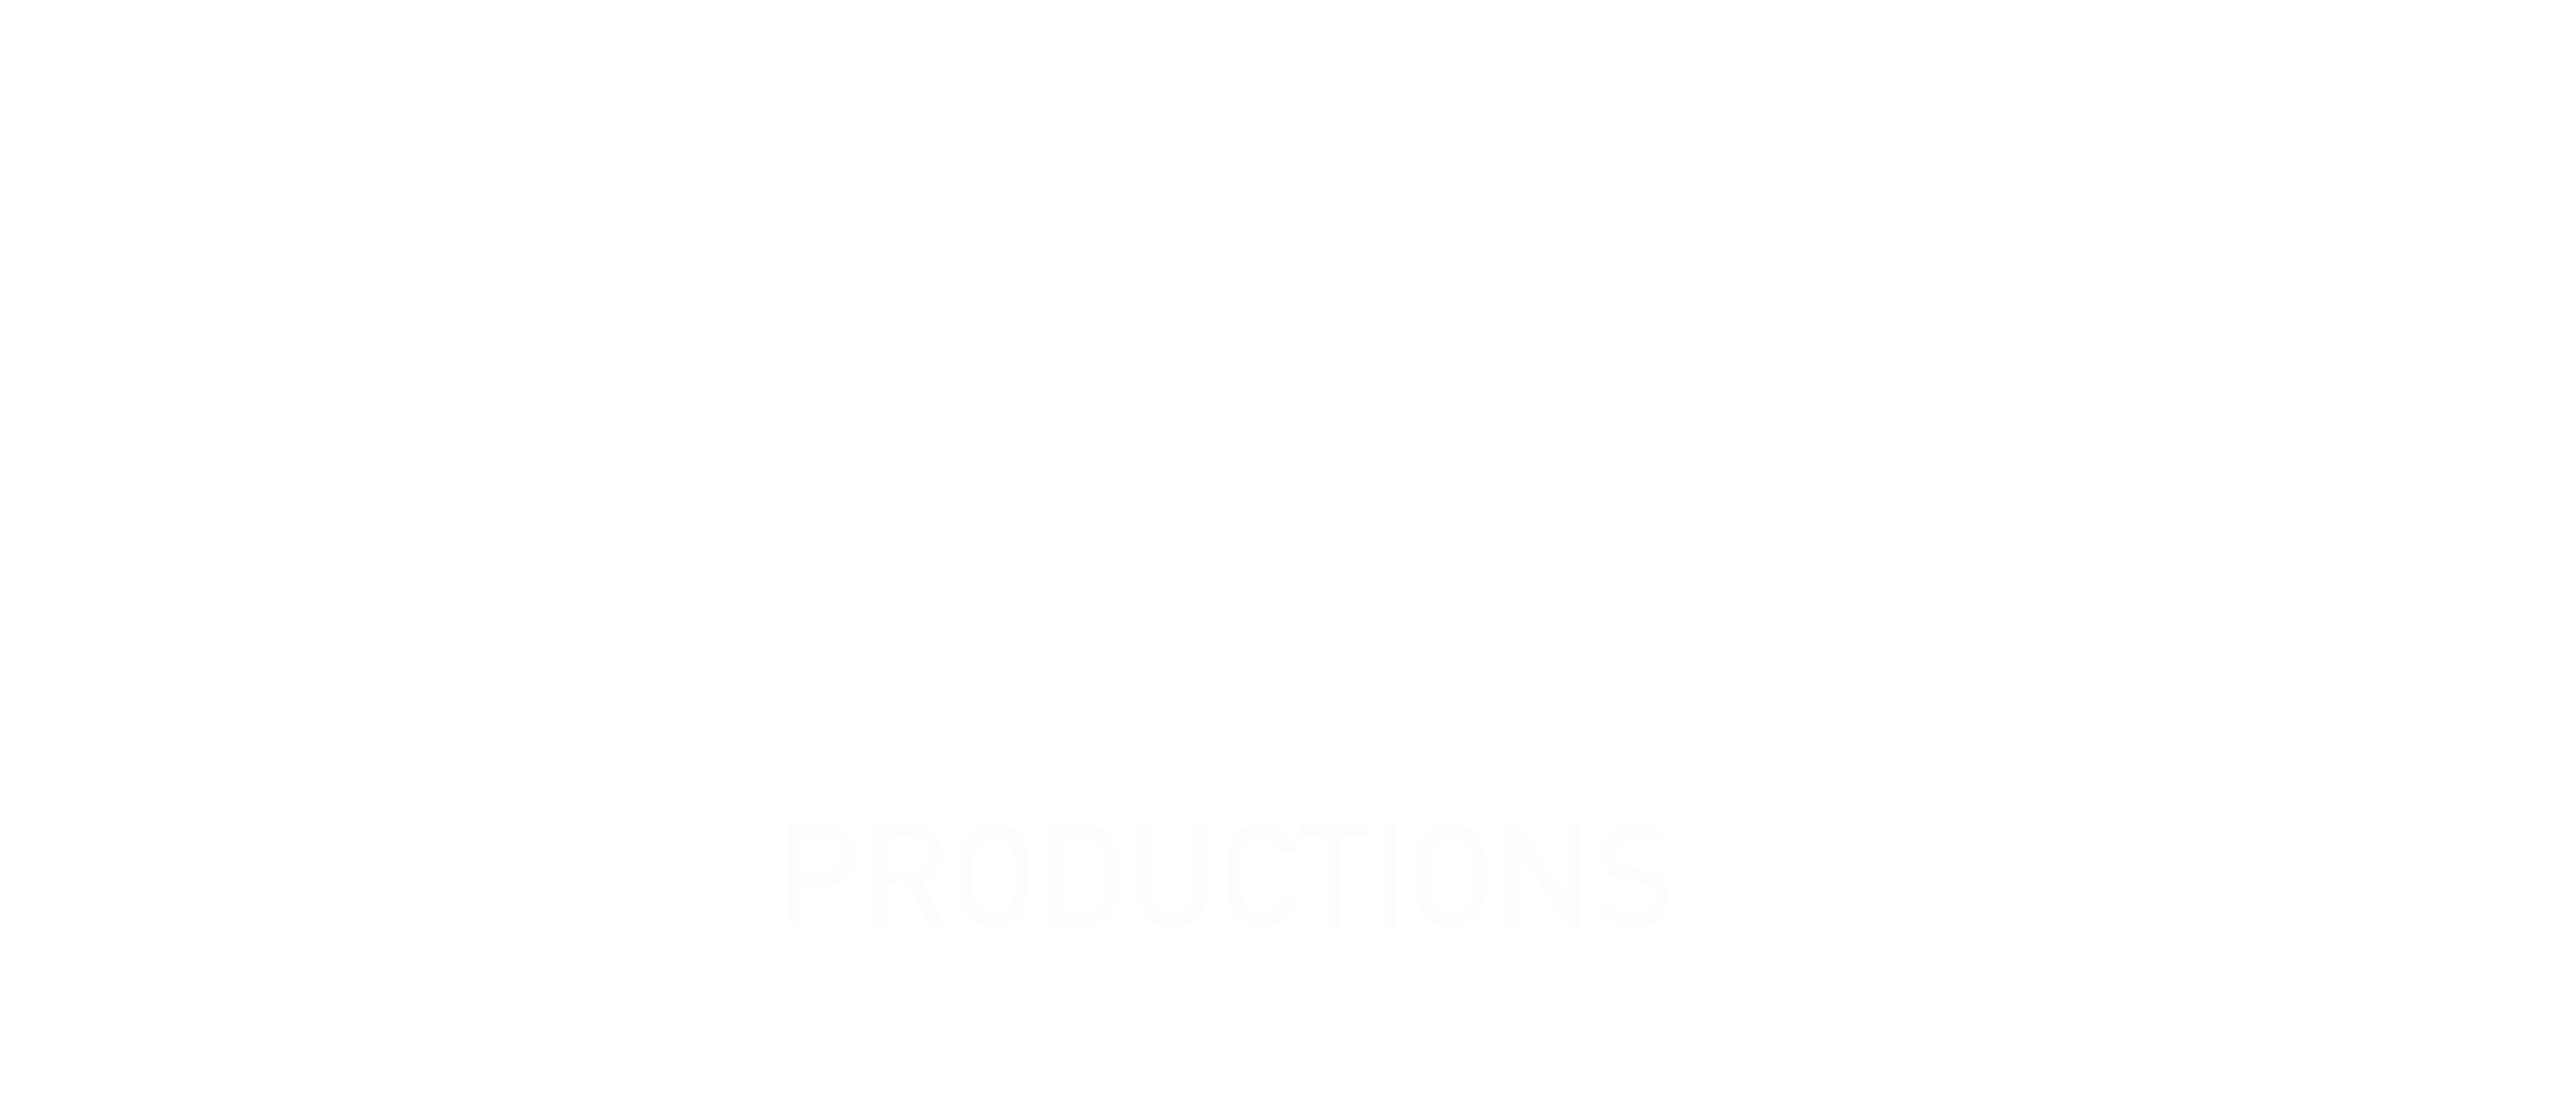 Peter Muld Productions